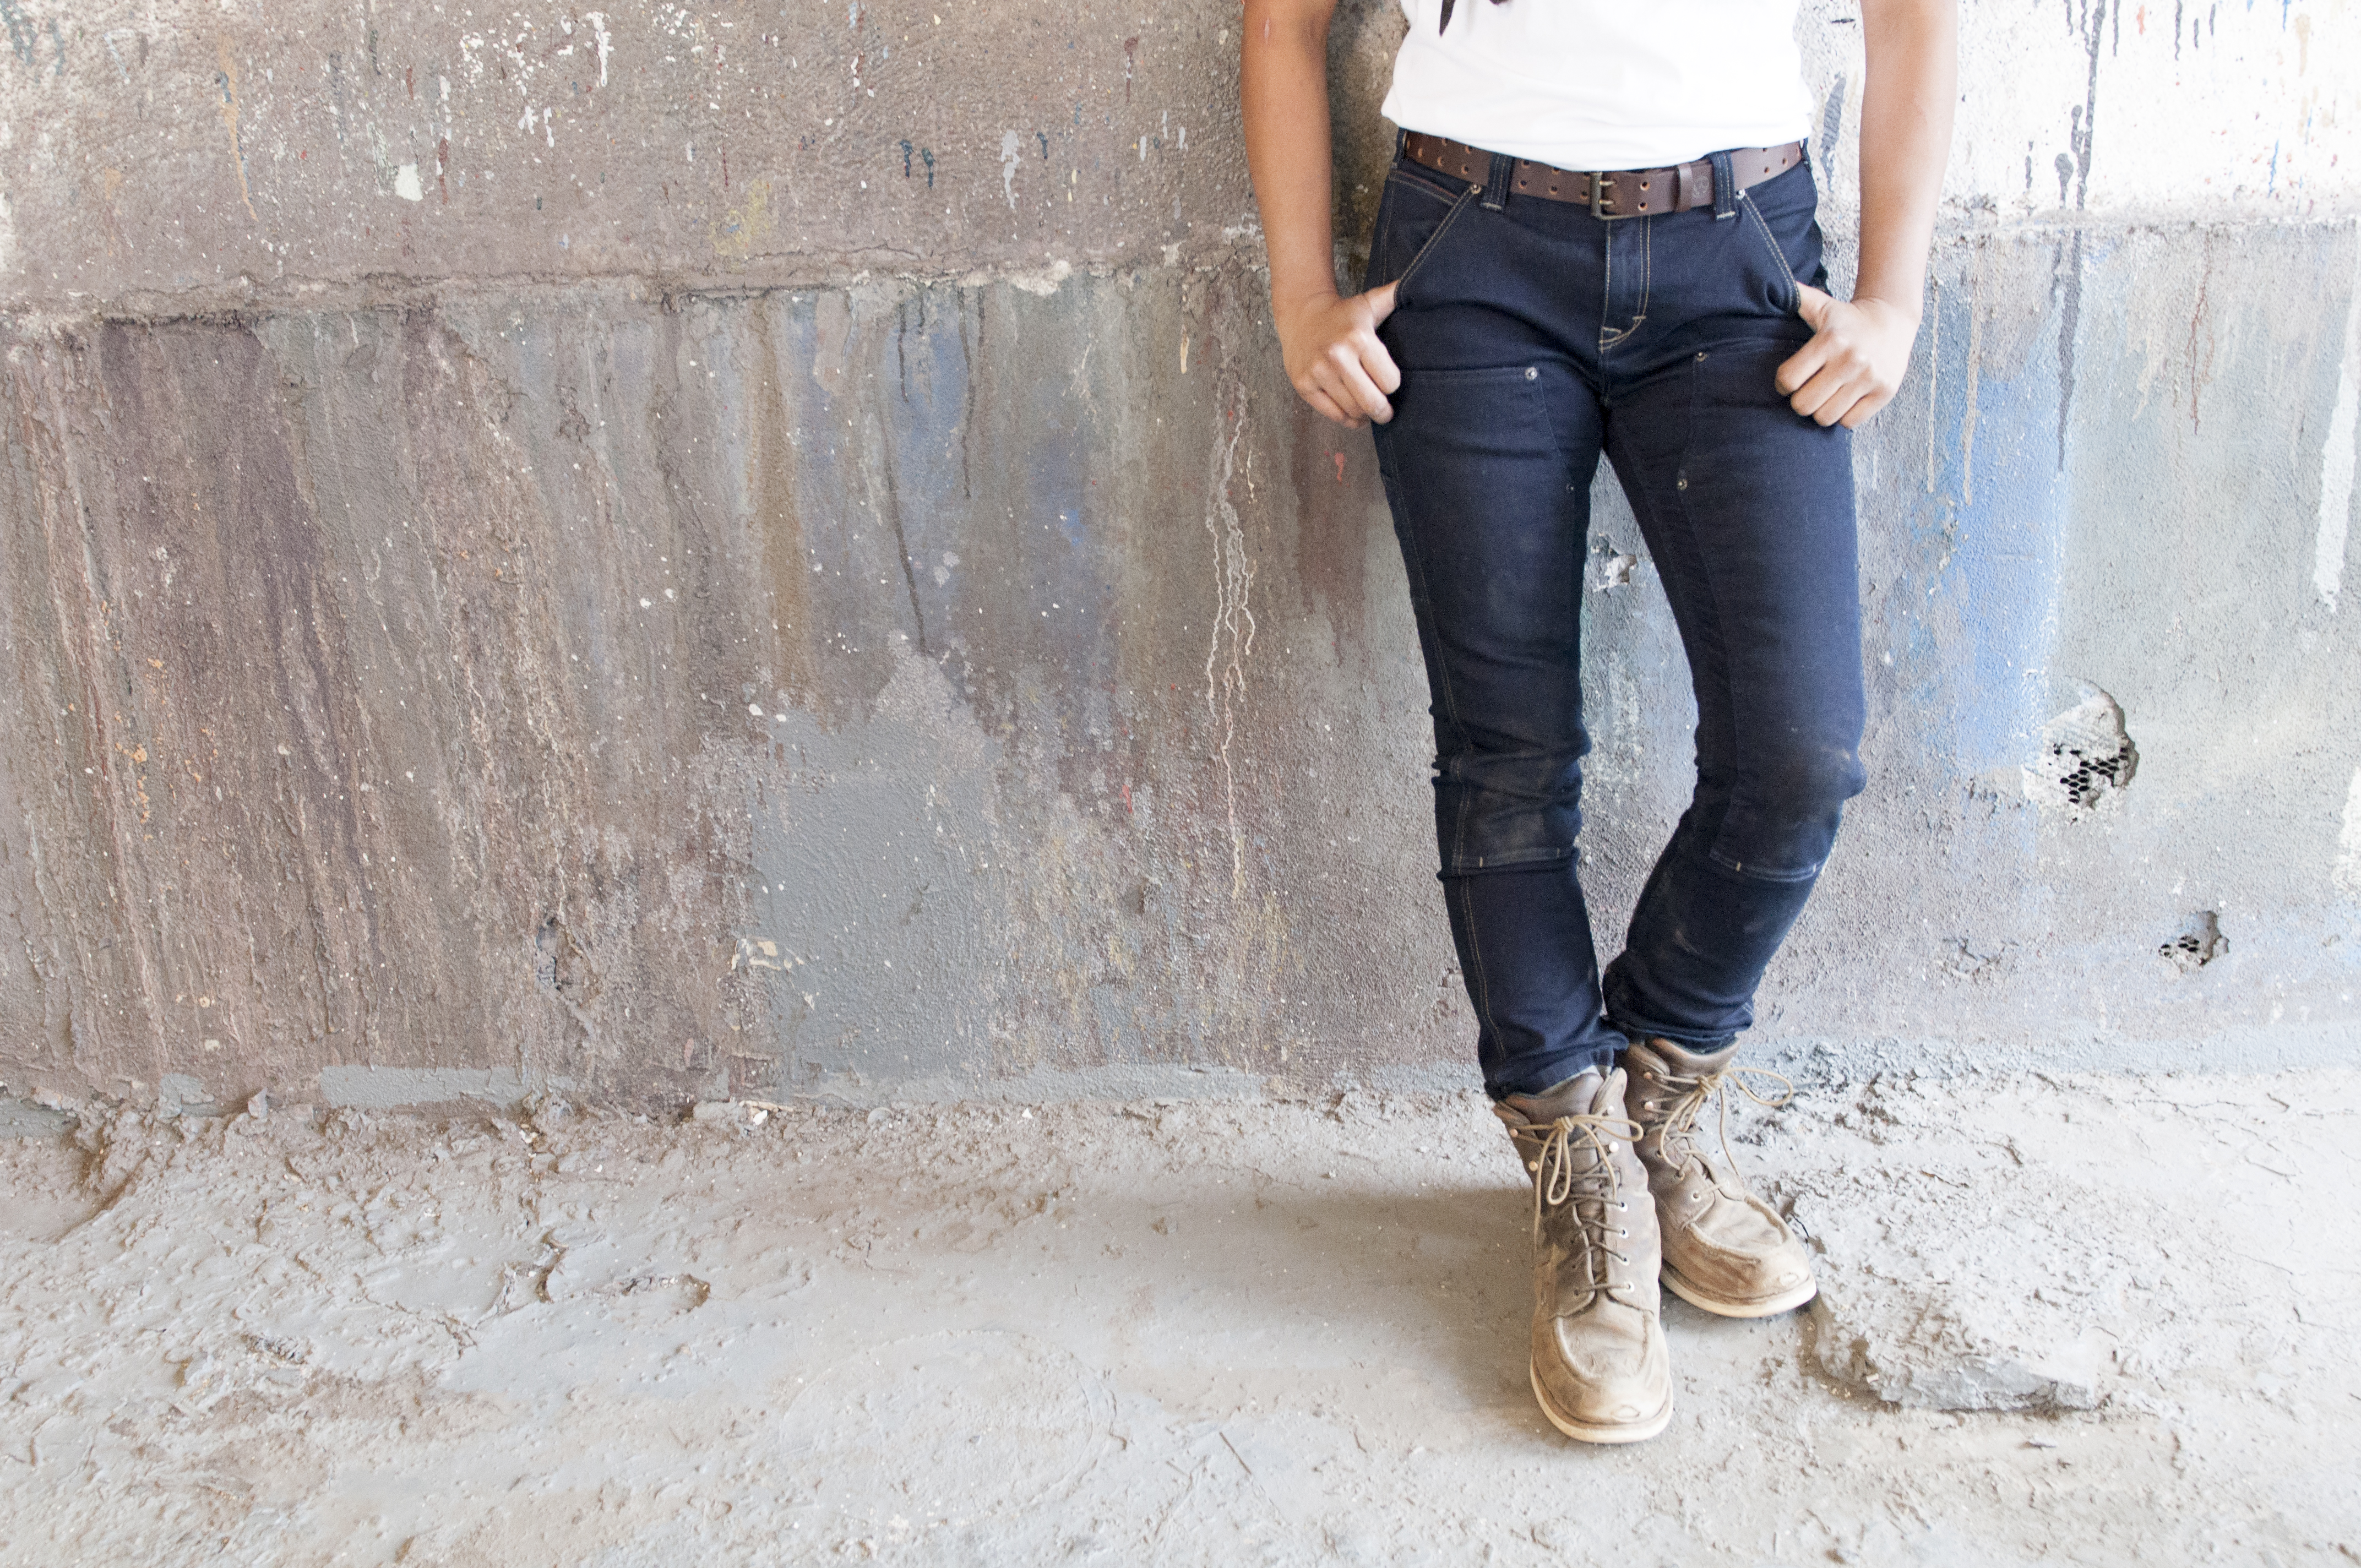 11 Places to Find Tough and Reliable Women's Workwear